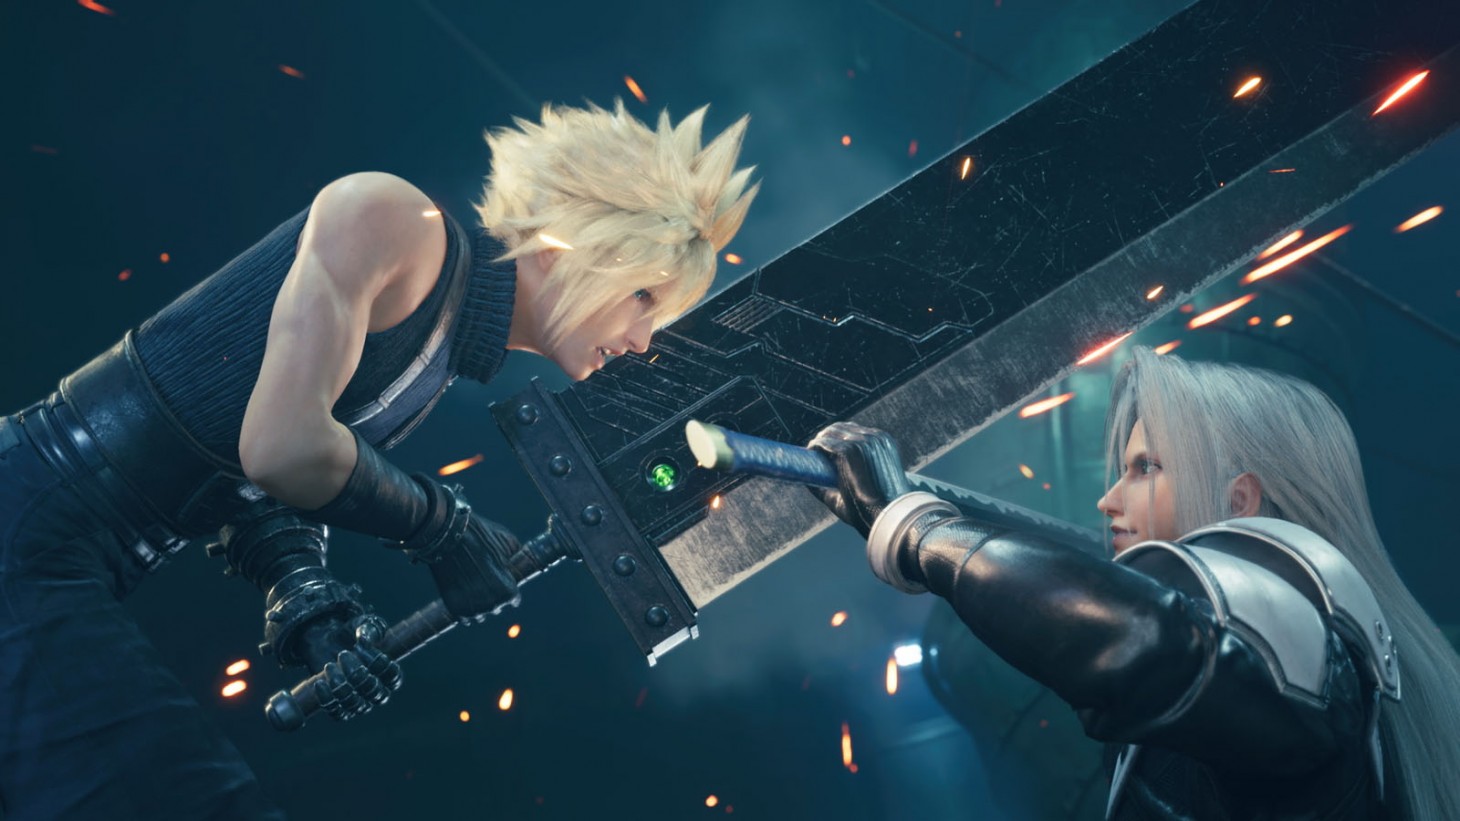 Final Fantasy VII Remake for PS4 and PS5 is half off until August